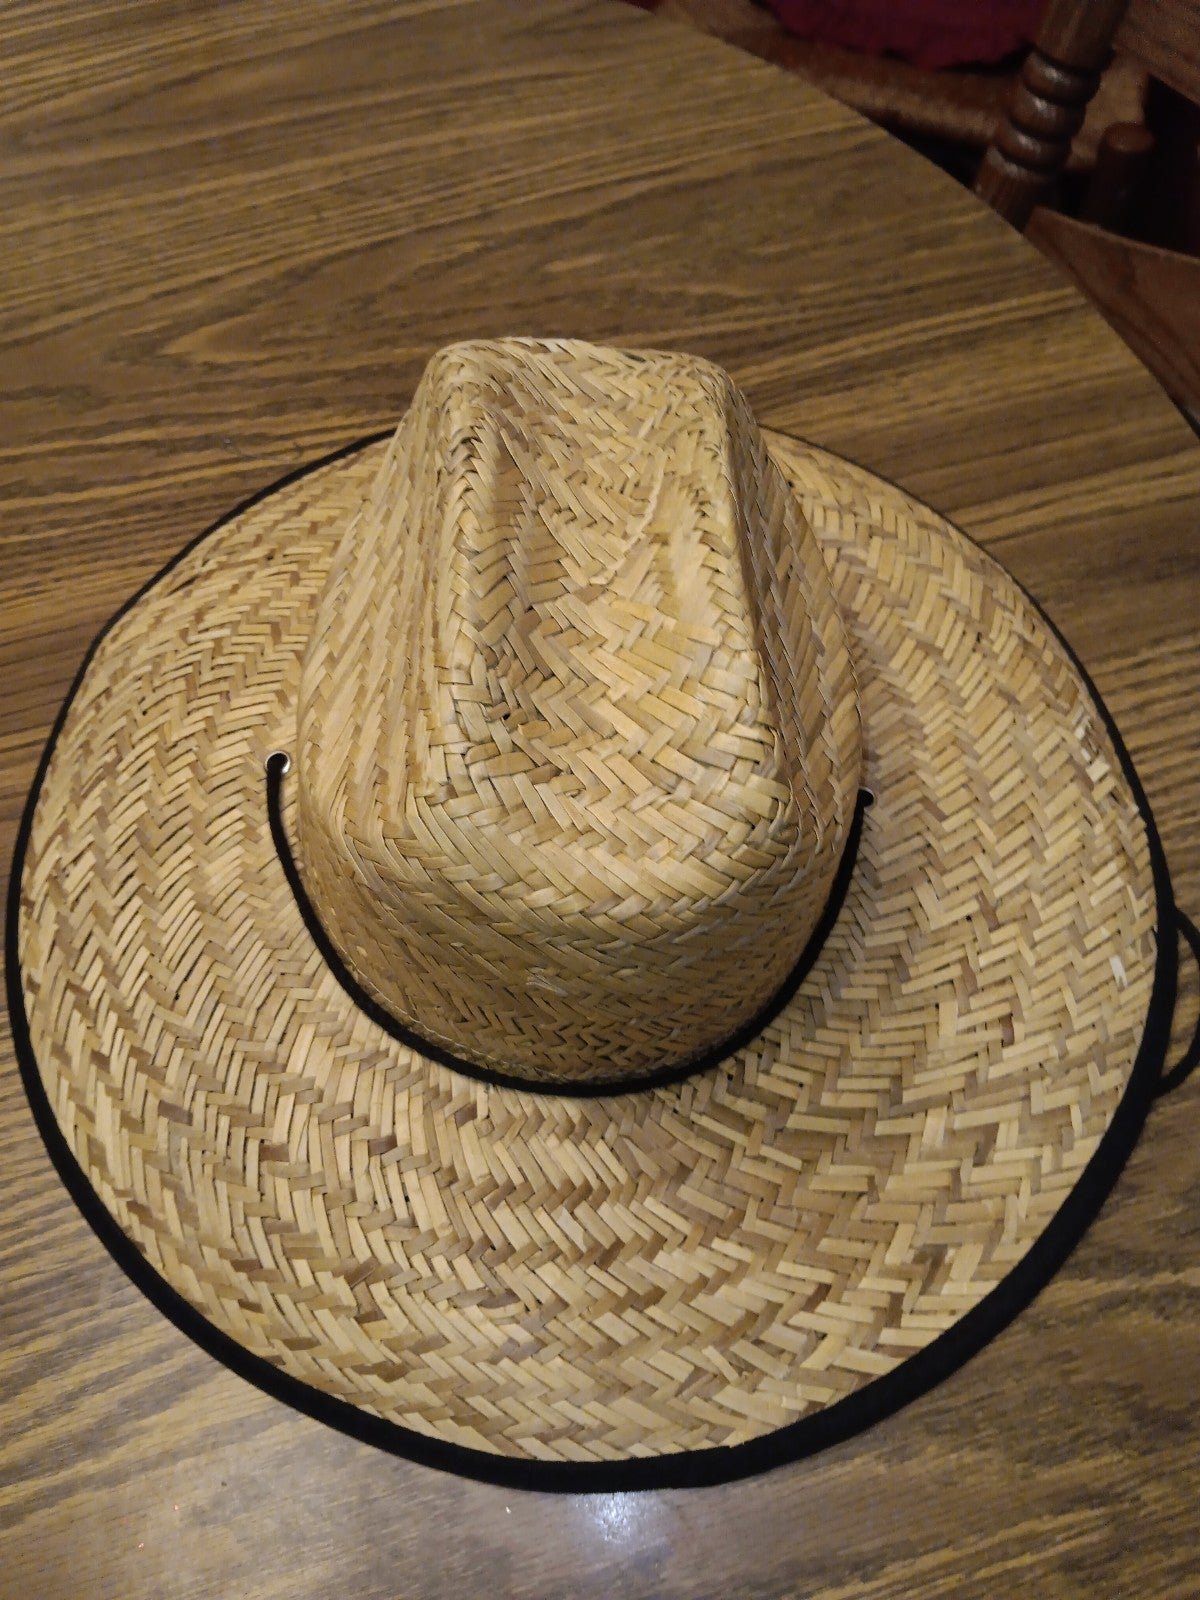 Fish and fame straw hat A86e7teCD